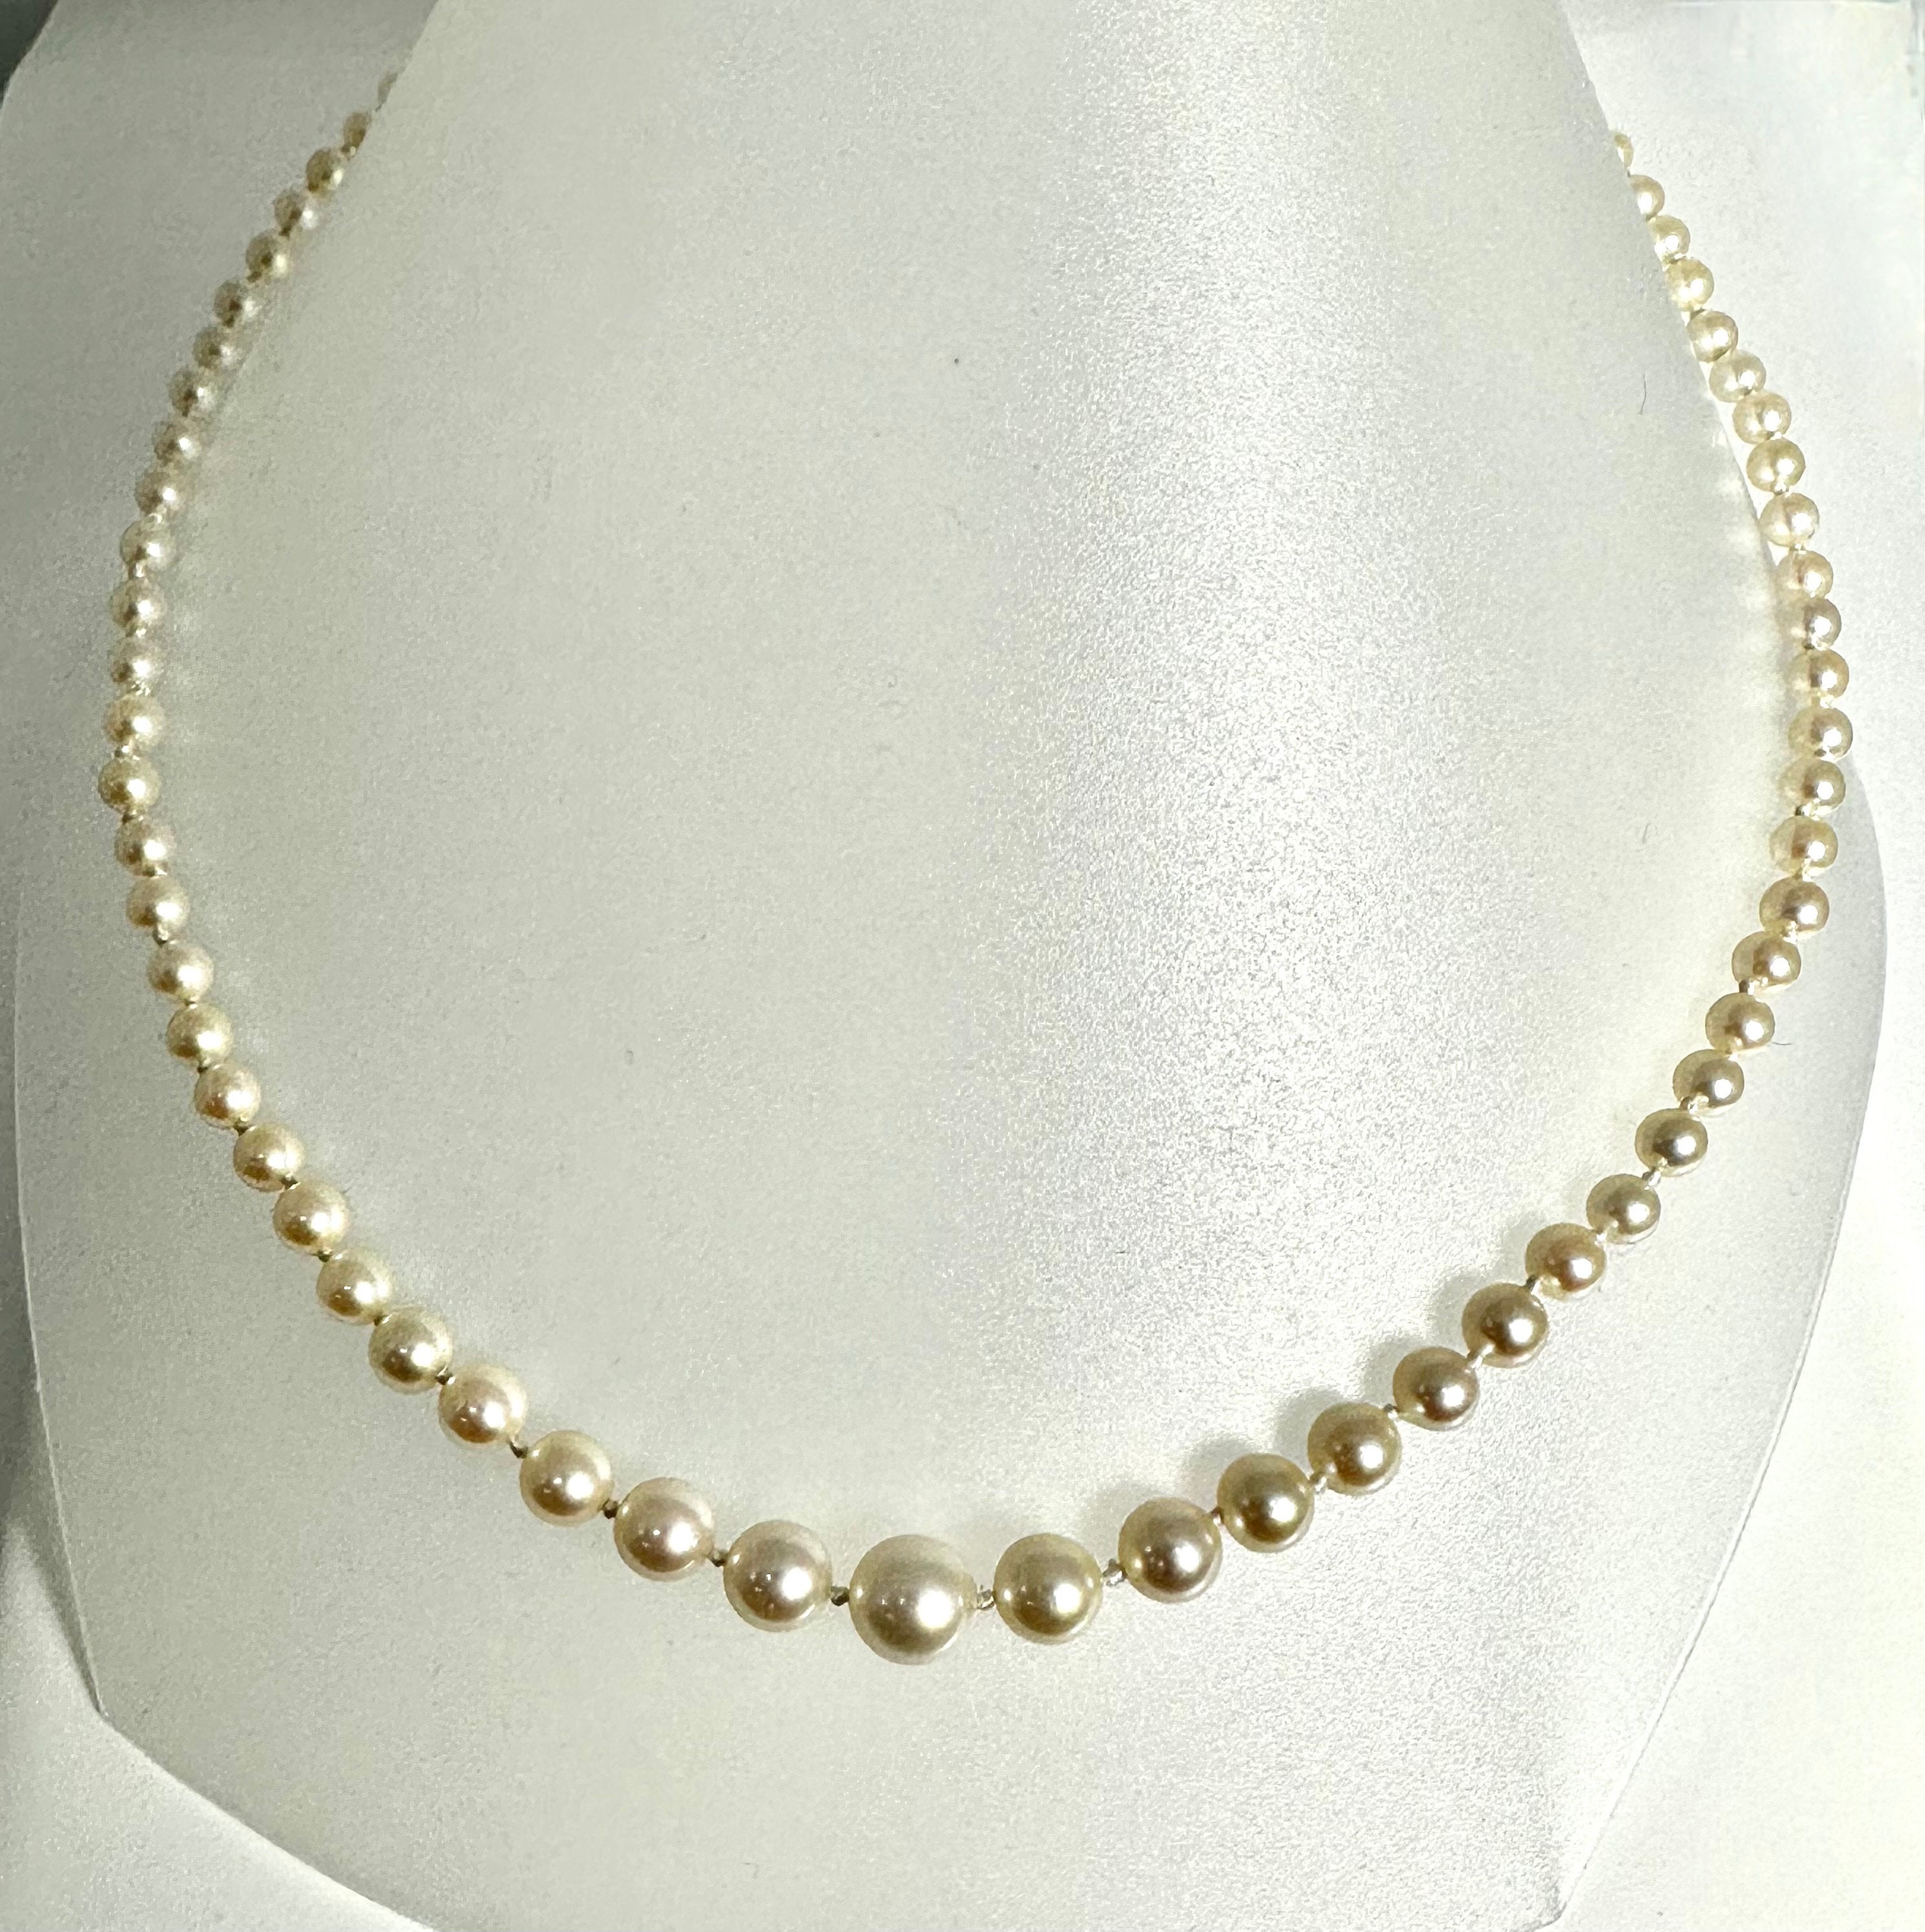 Double Strand Necklace Filigree Pearl Clasp